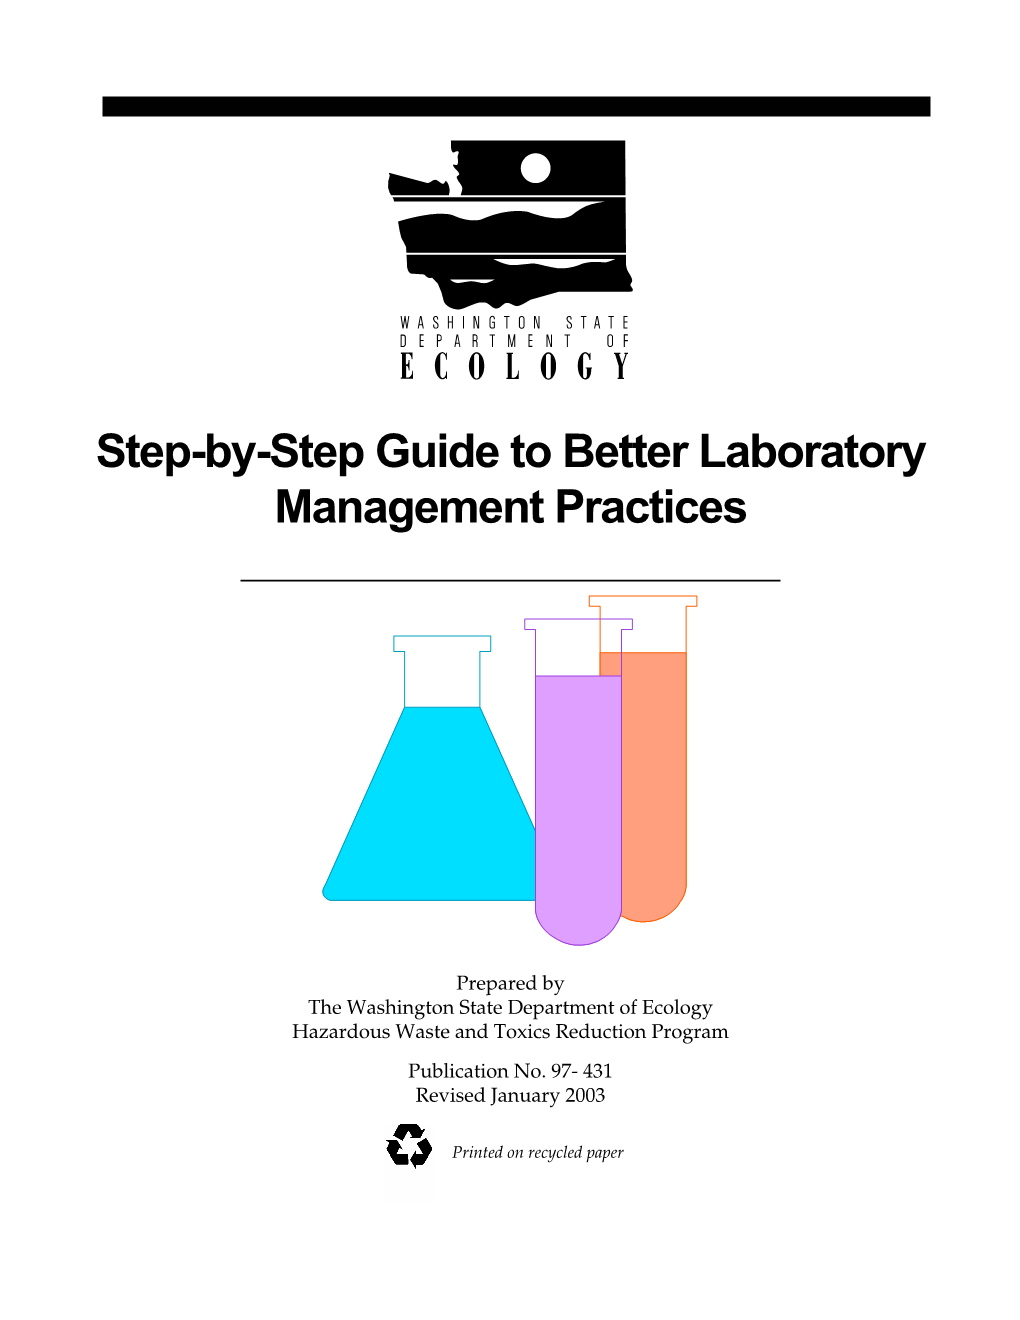 Step-By-Step Guide to Better Laboratory Management Practices